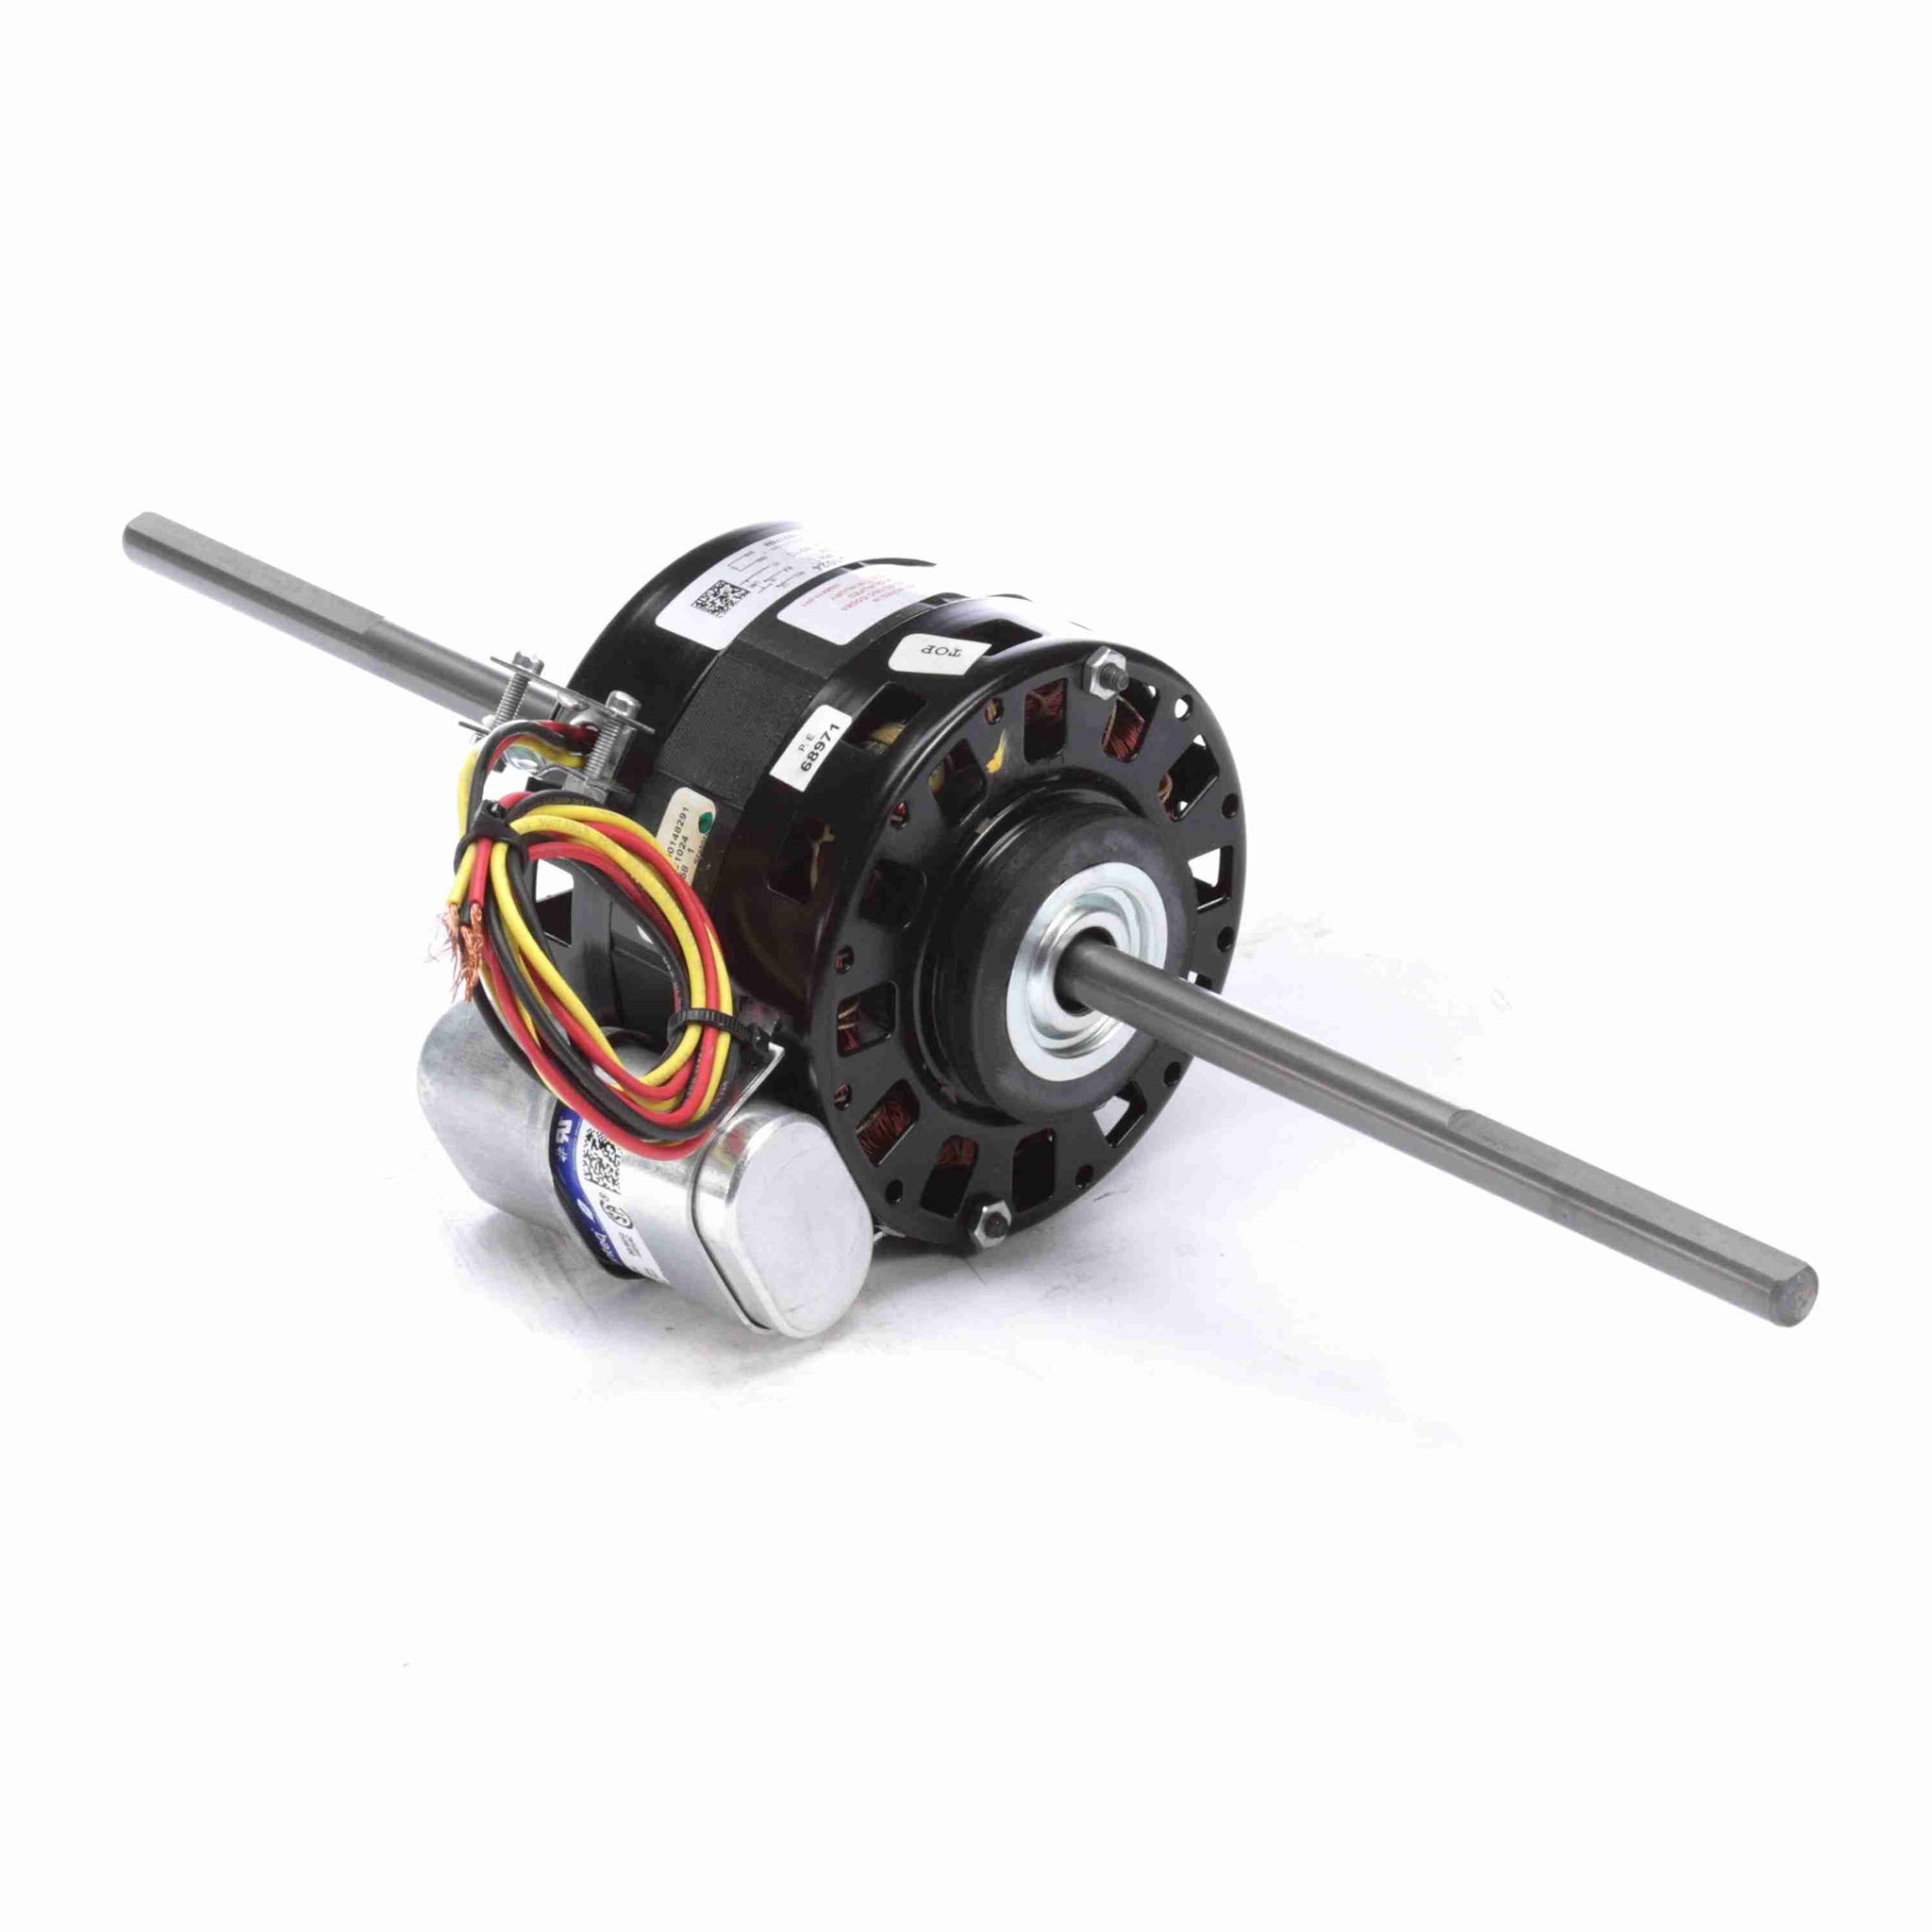 OFC1024 - 1/4 HP OEM Replacement Motor, 1625 RPM, 2 Speed, 208-230 Volts, 42 Frame, OAO - Hardware & Moreee